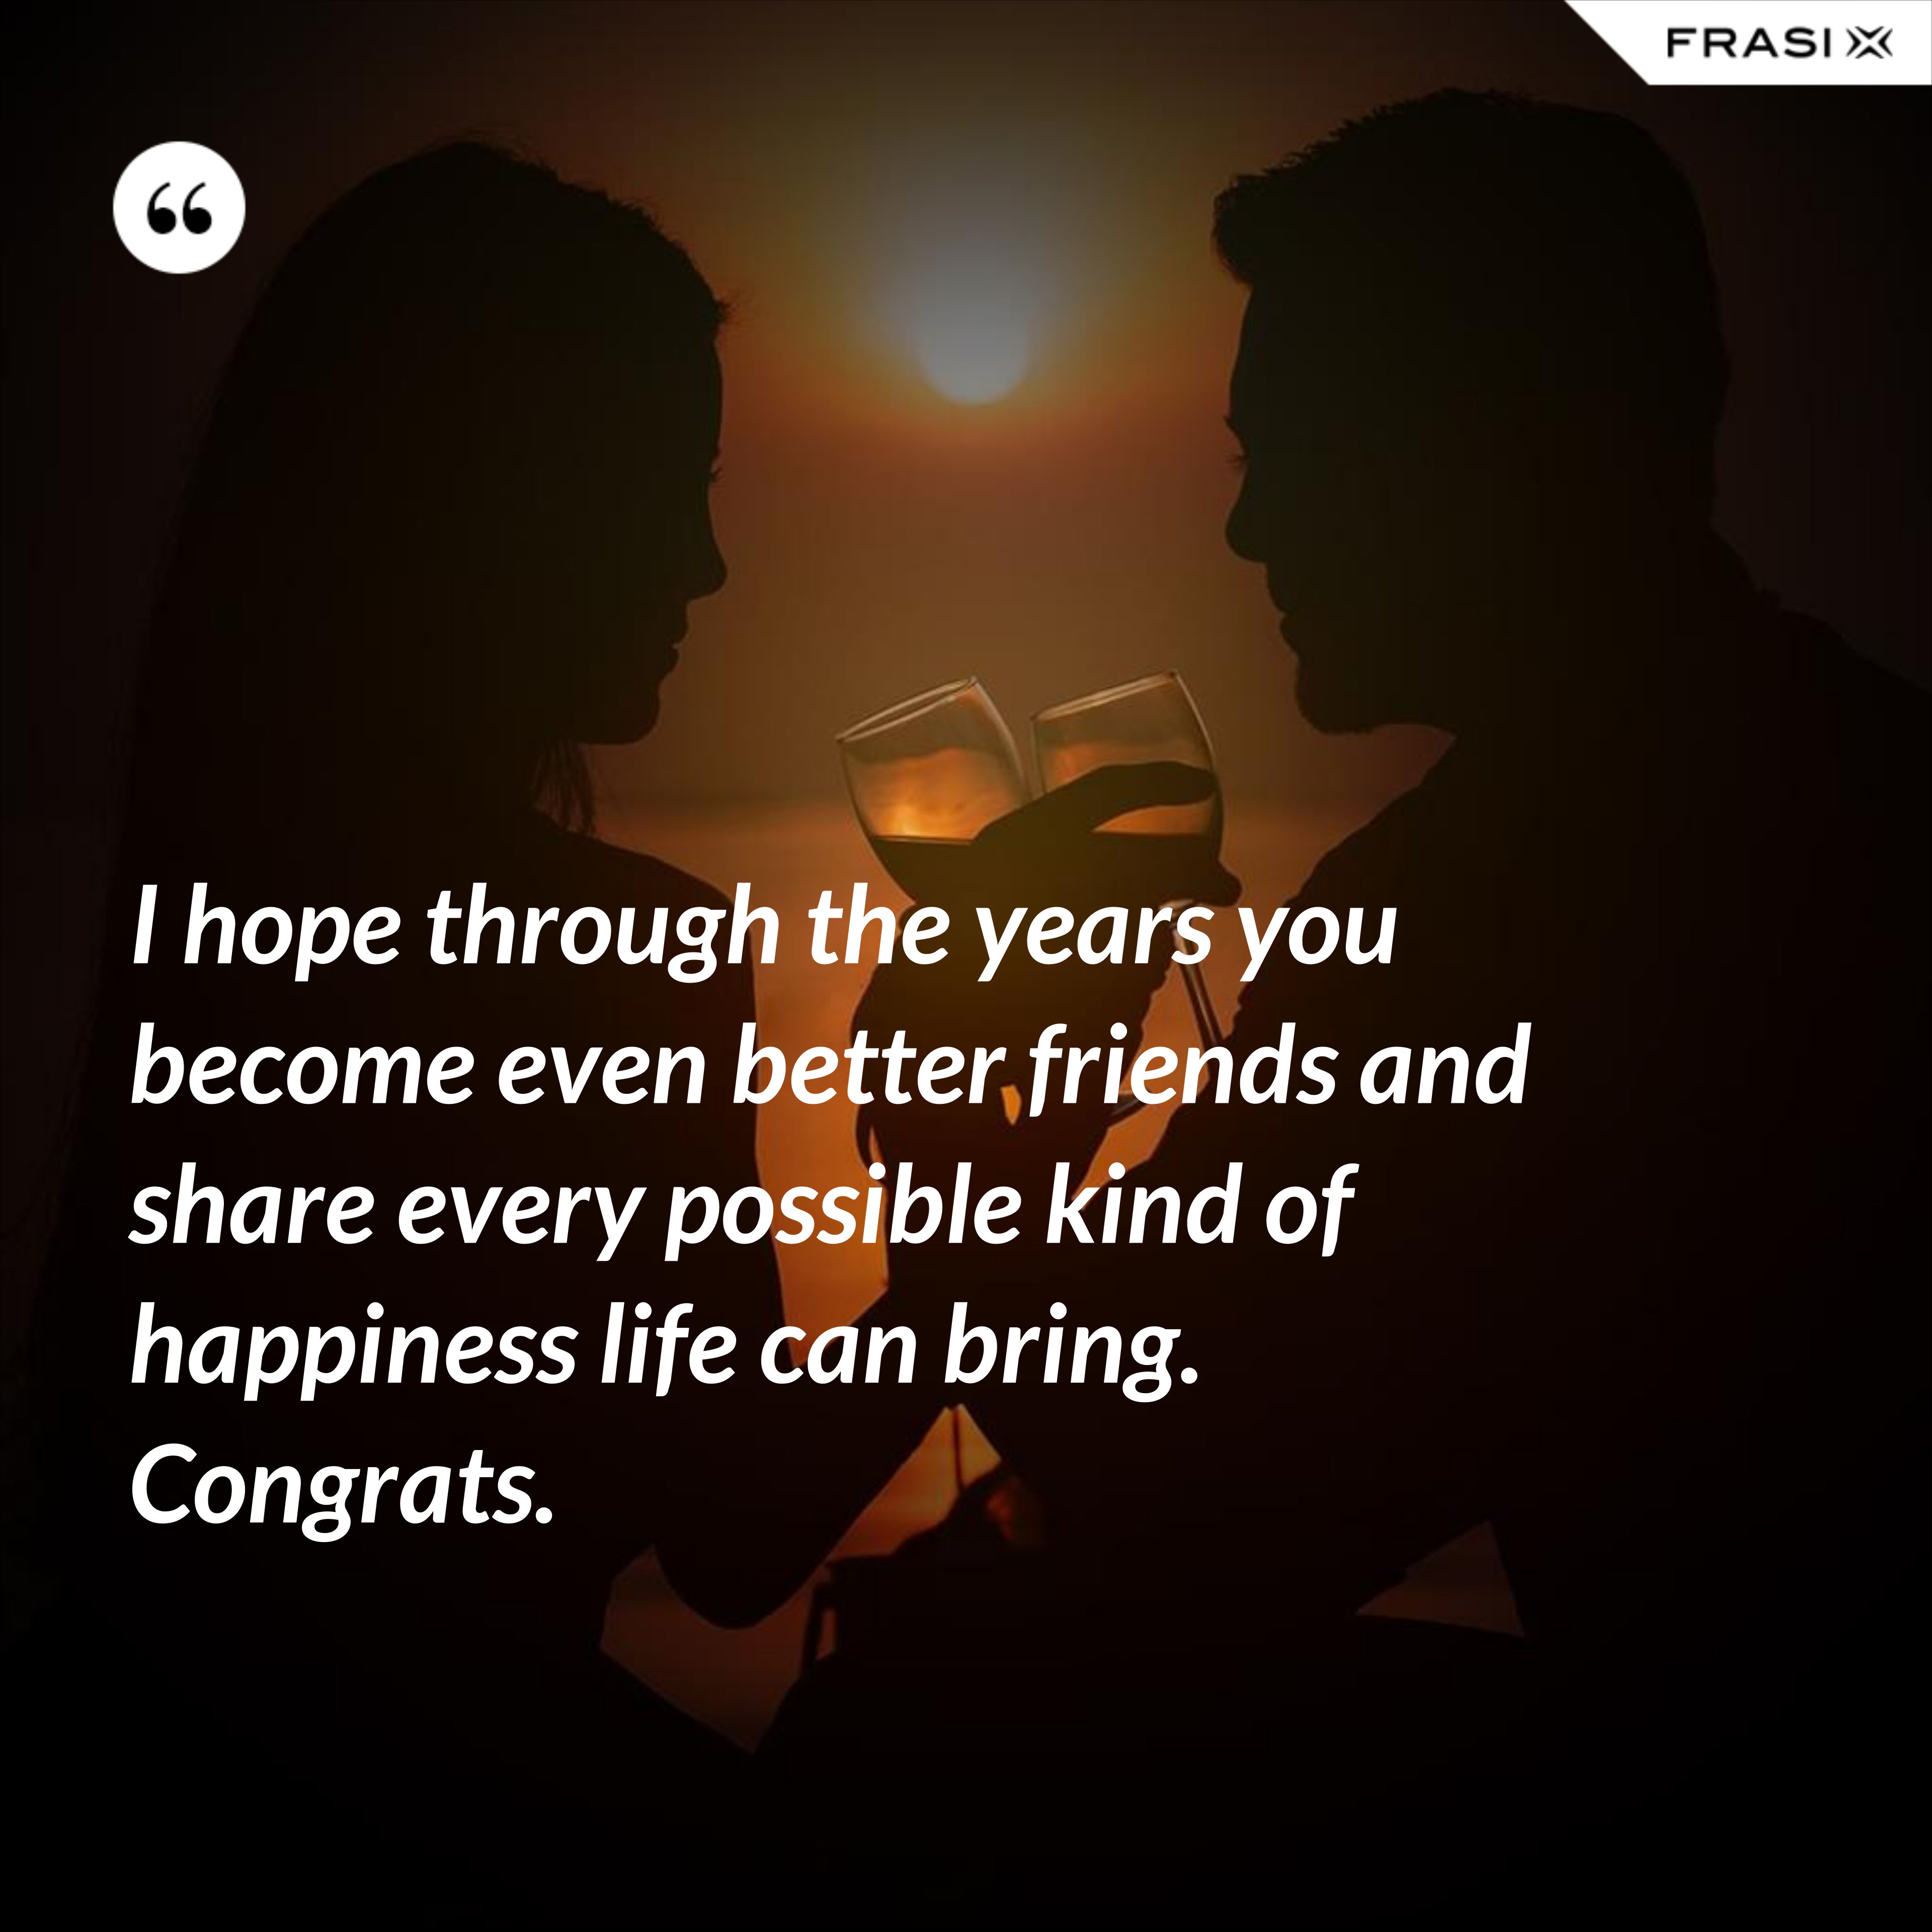 I hope through the years you become even better friends and share every possible kind of happiness life can bring. Congrats. - Anonimo